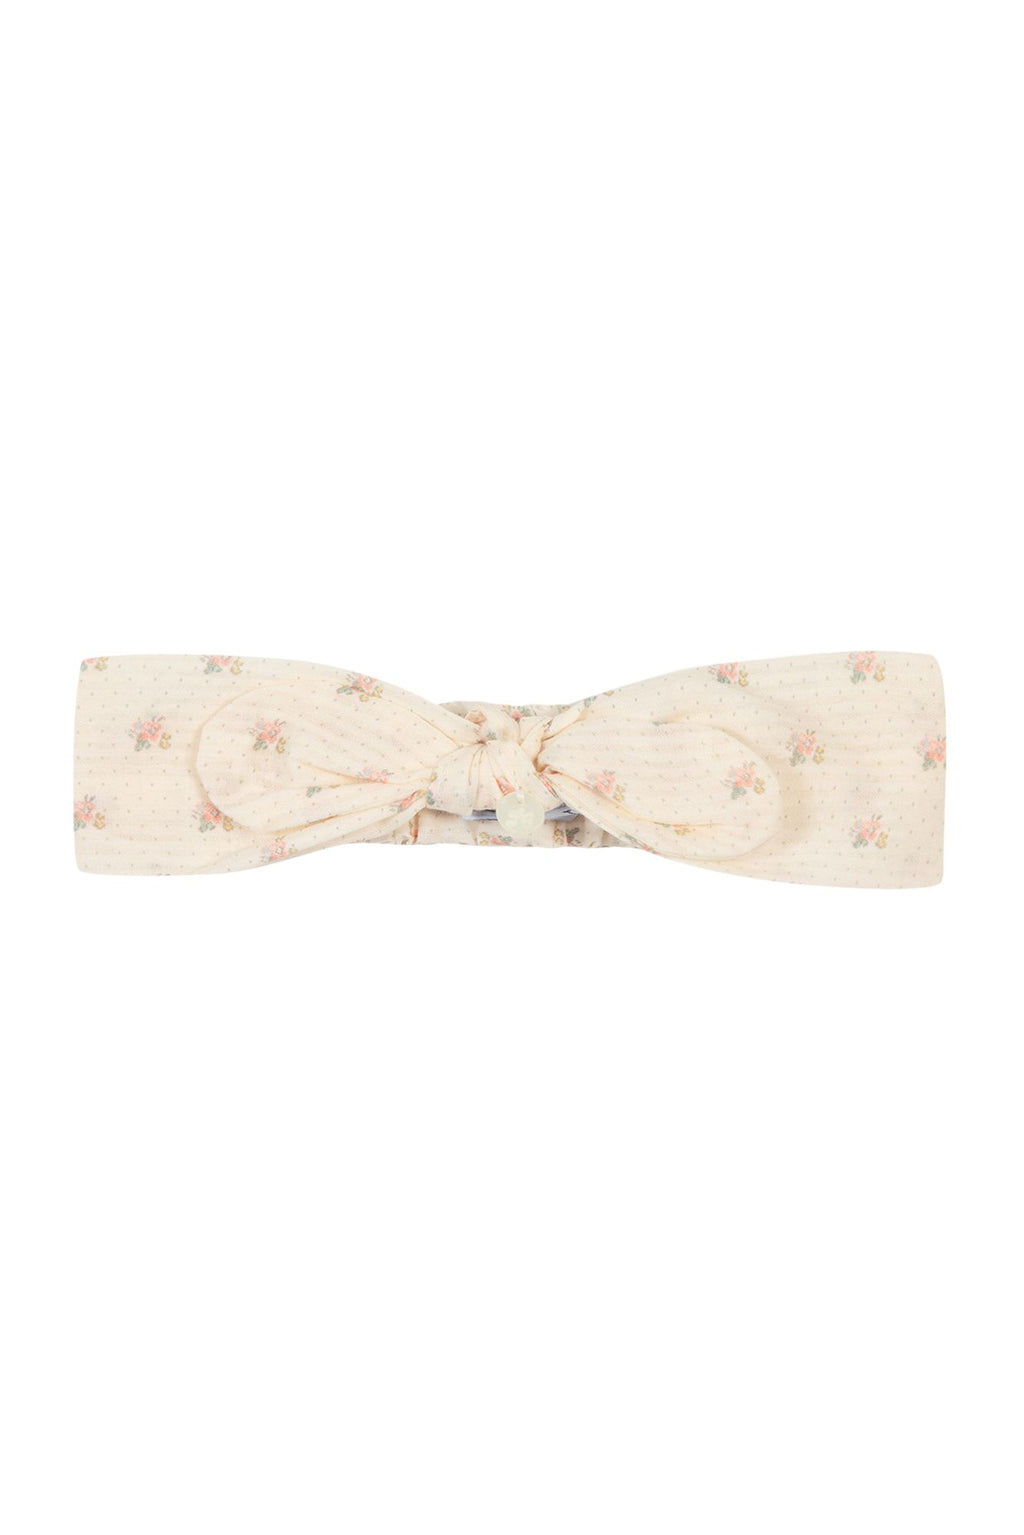 Headband - mother -of -pearl cotton